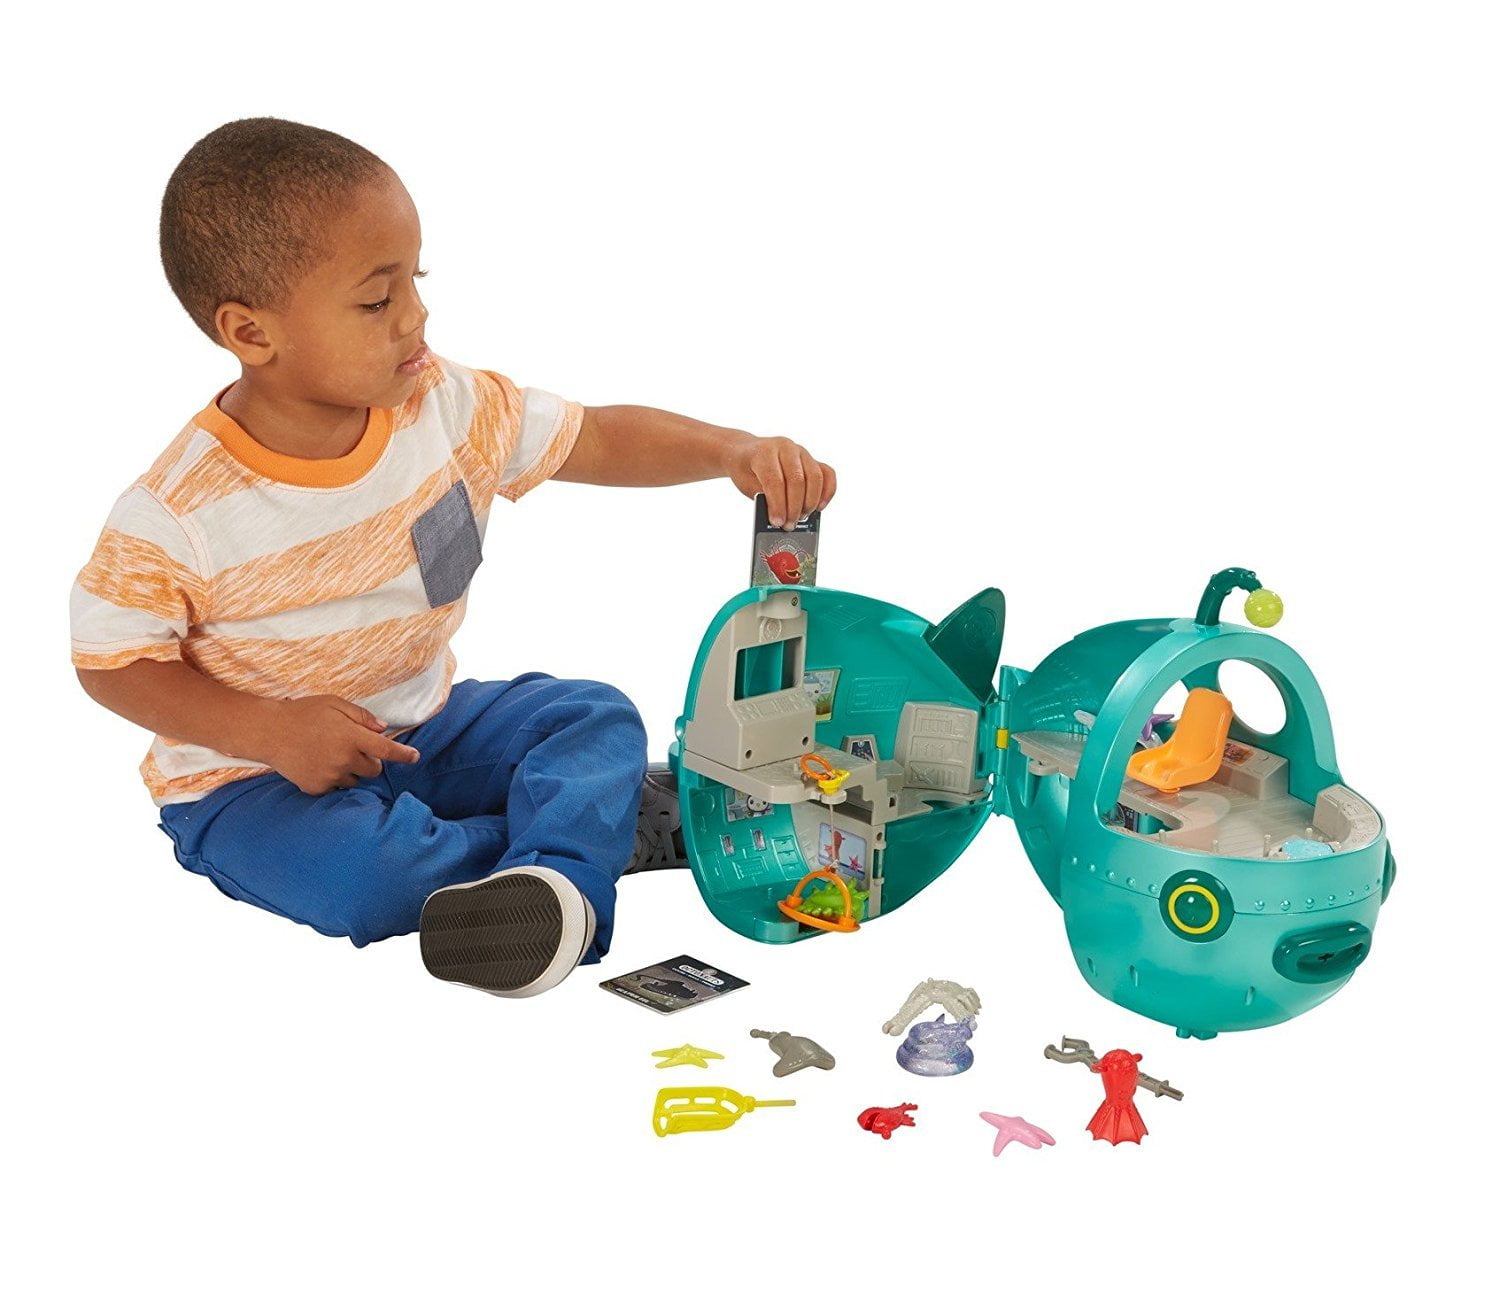 Details about   Playset Toy Fisher-Price Octonauts Gup A Deluxe Vehicle Toys Gamestoys Games Pre 